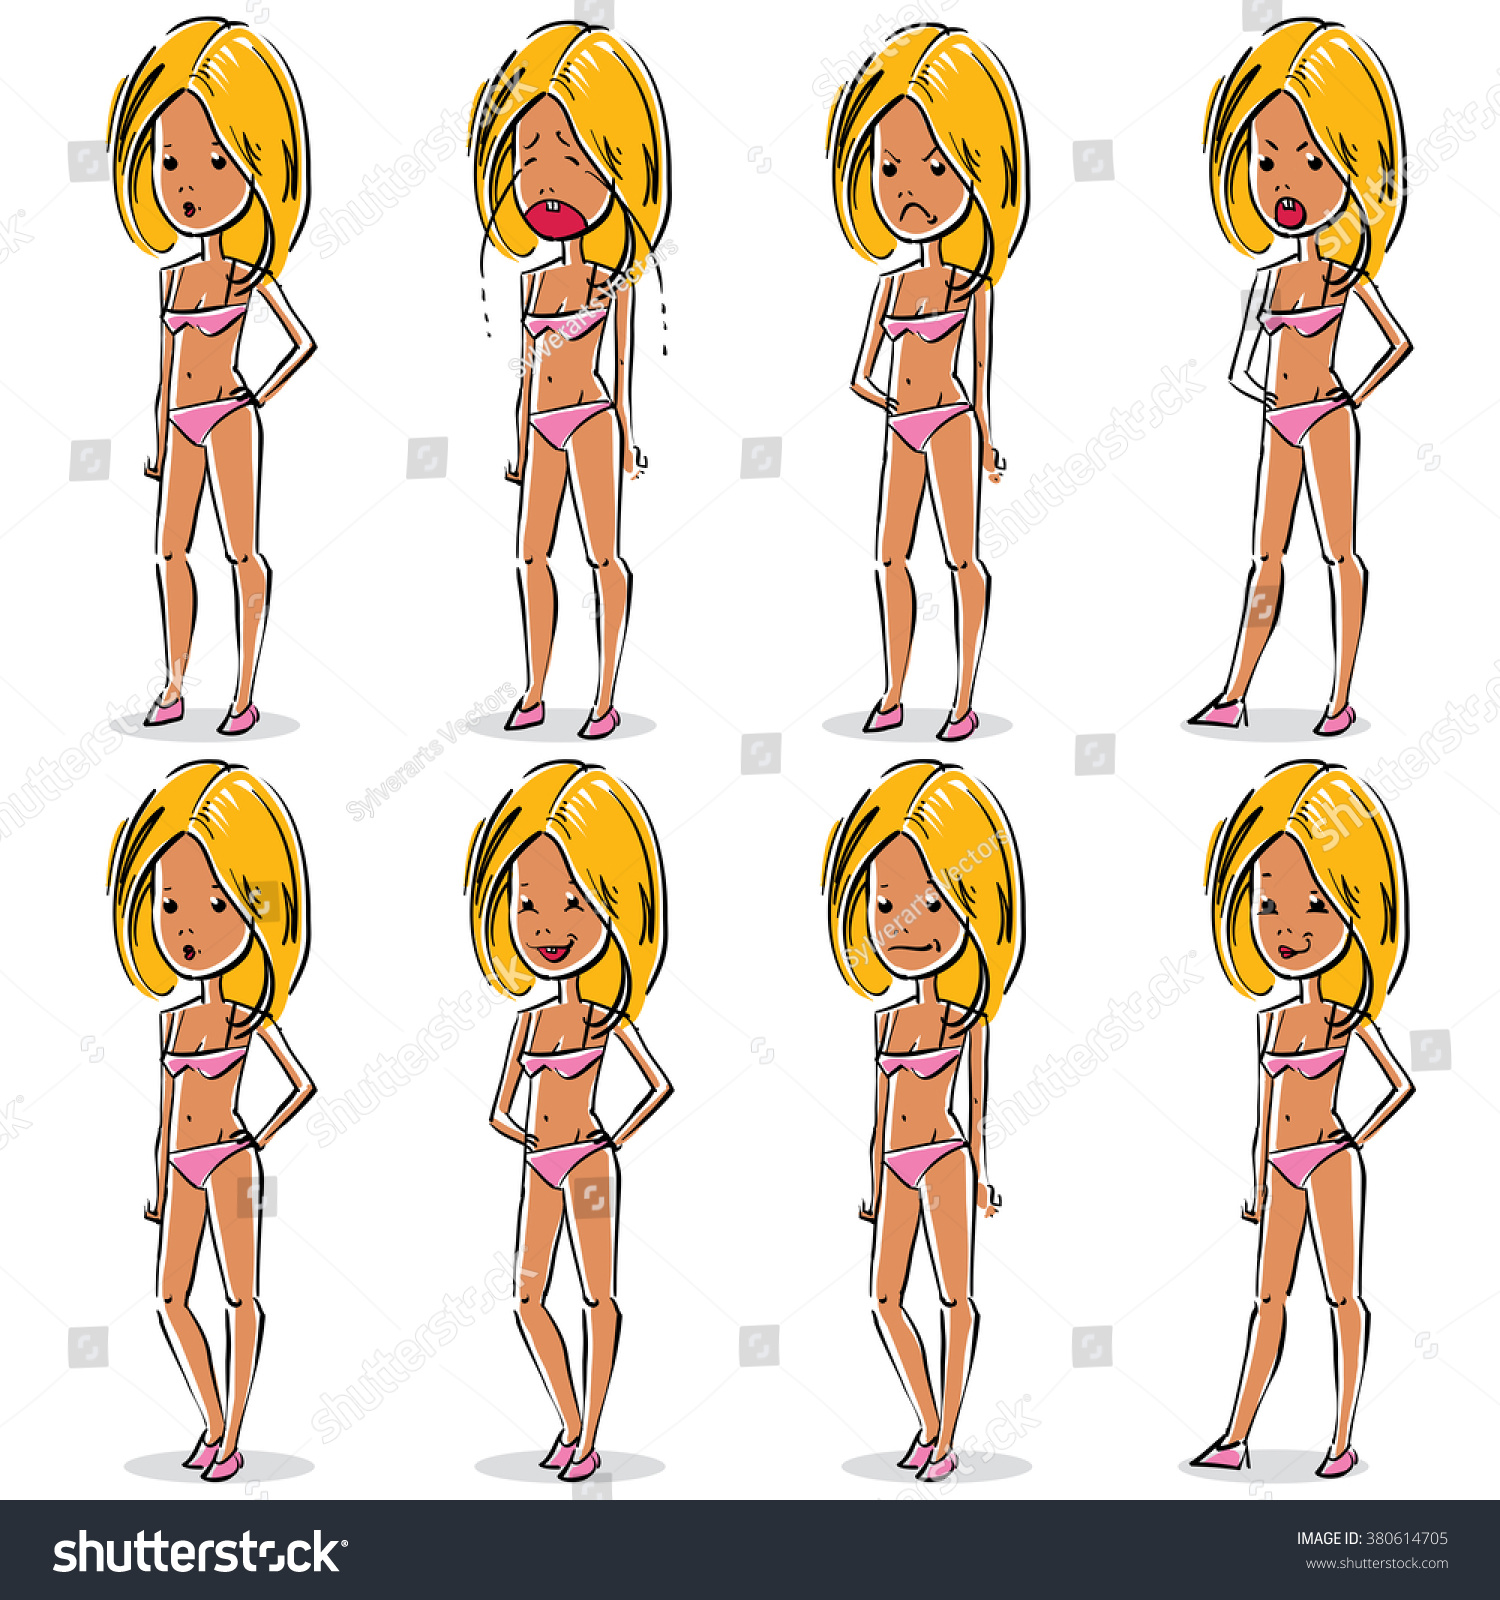 Collection Vector Fulllength Portraits Sexy Women Stock Vector Royalty Free 380614705 4557